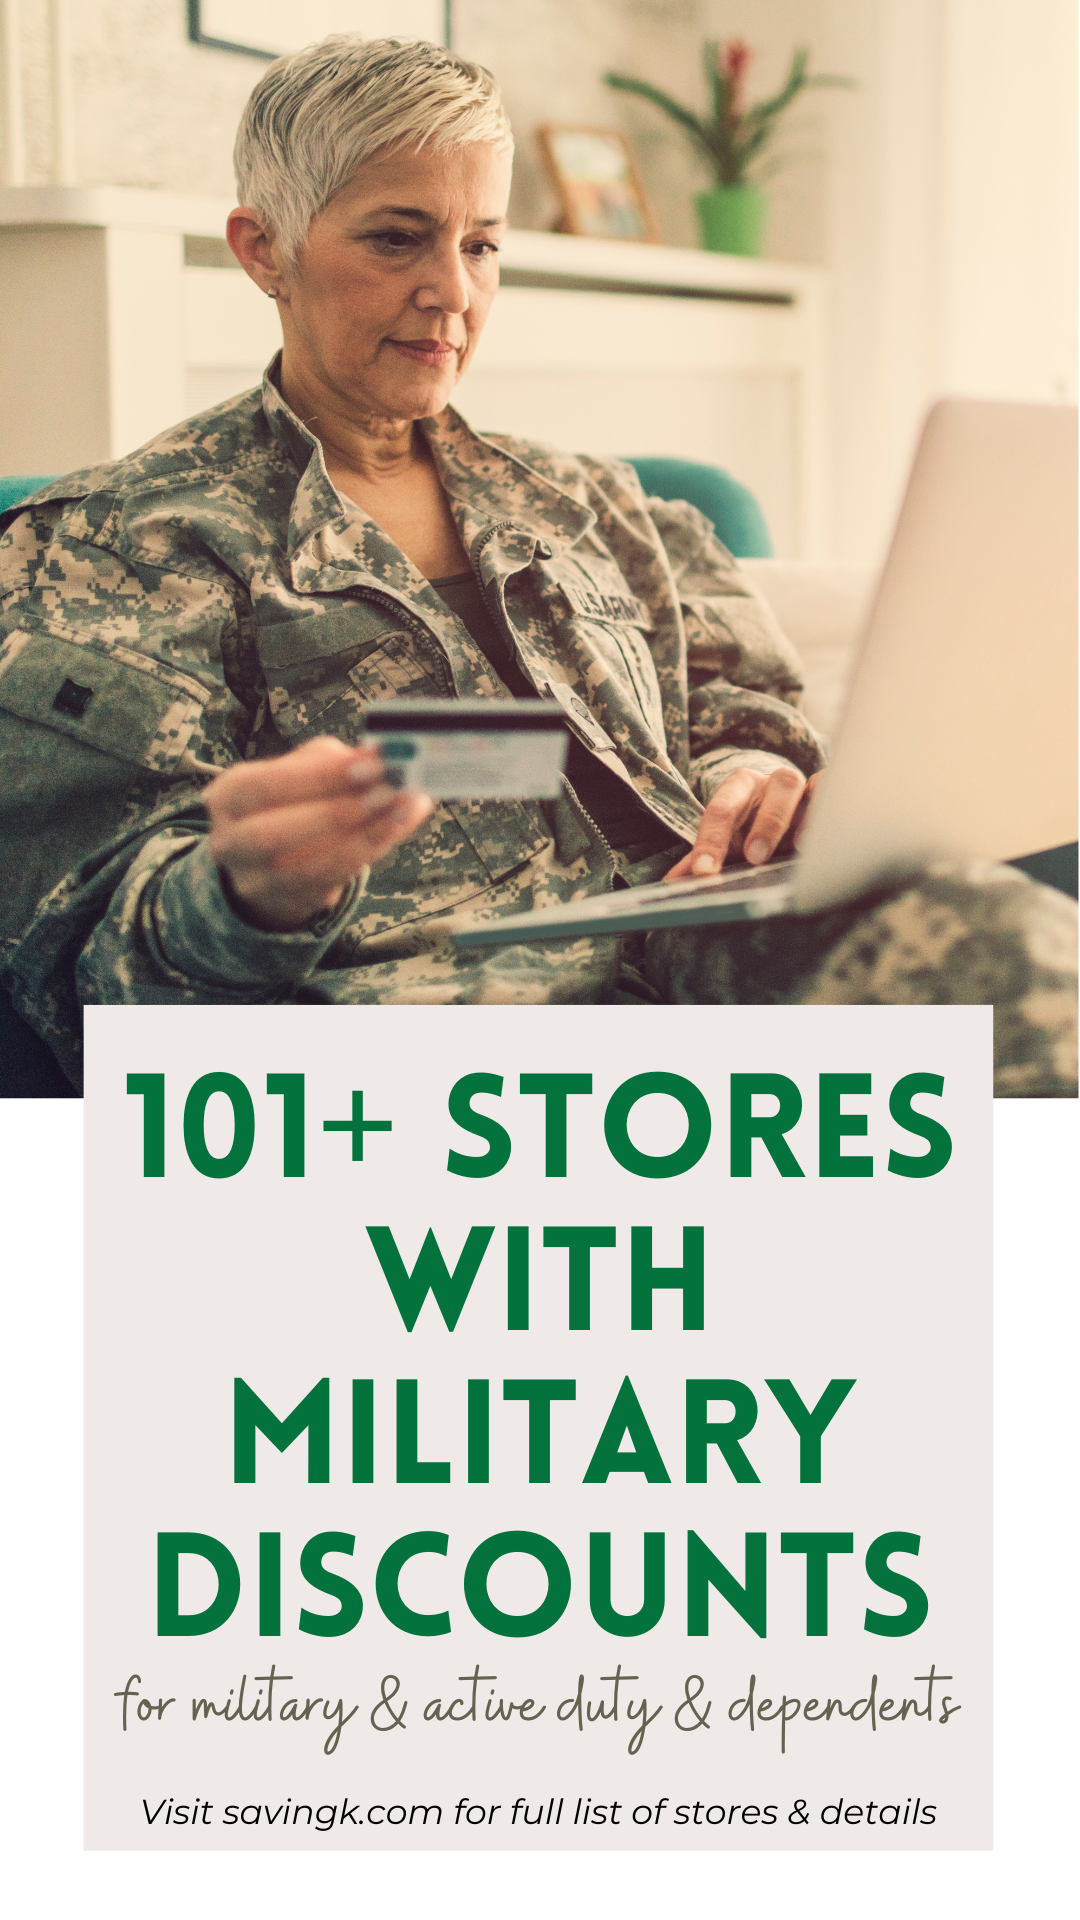 101+ Stores with Military Discounts For Veterans And Active Military